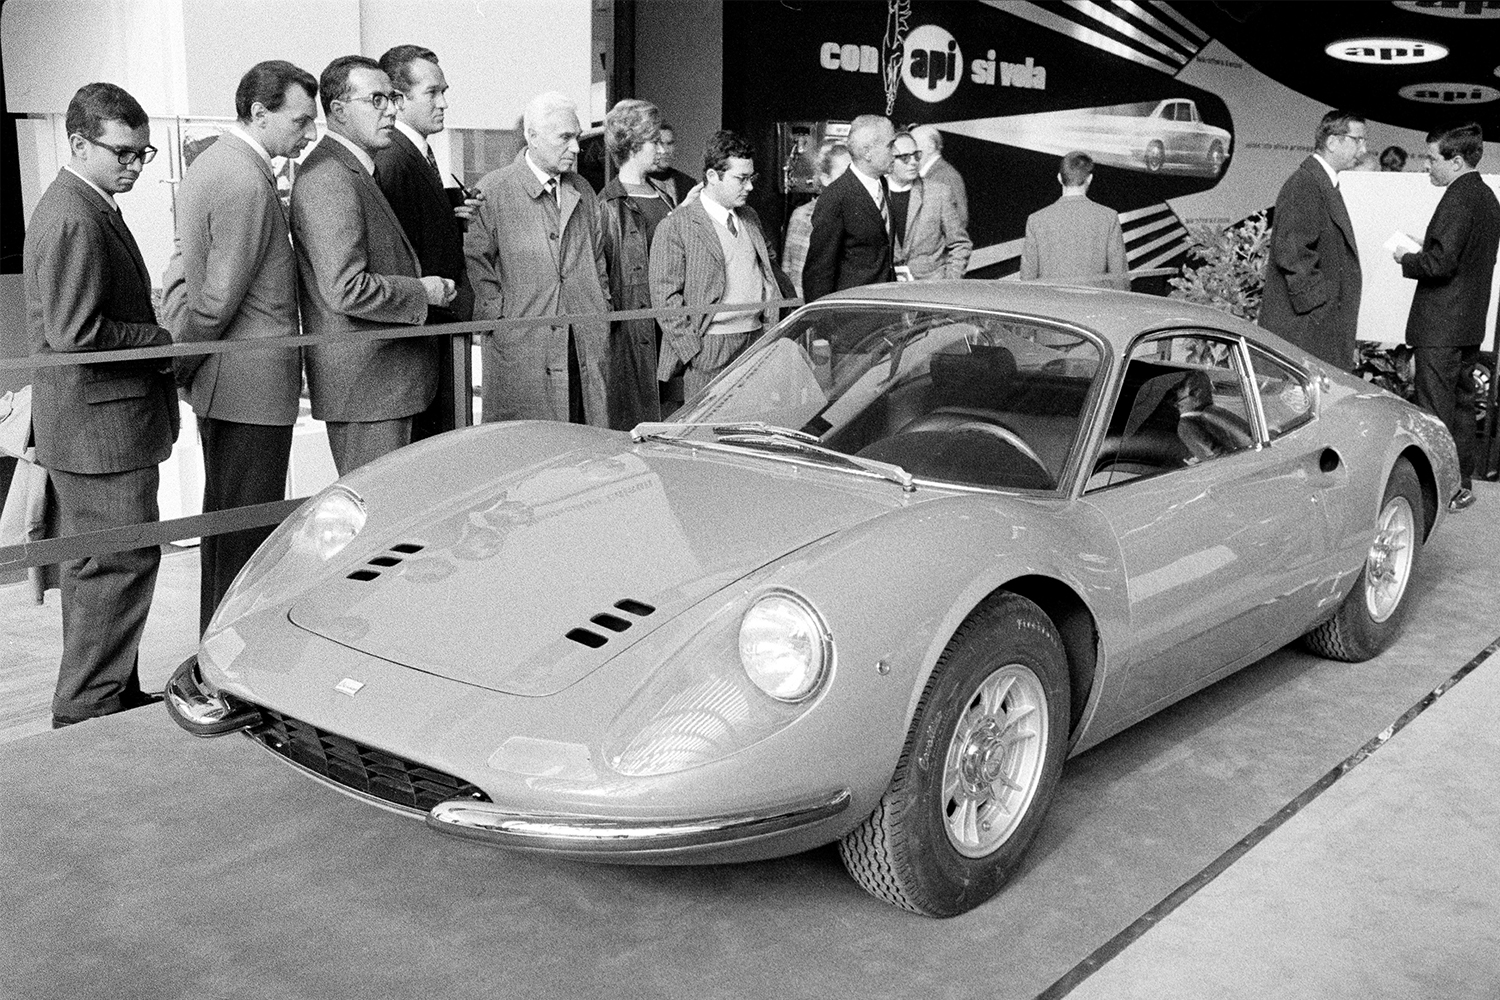 The production model of Ferrari’s Dino 206 GT at the Turin Auto Show in October 1967